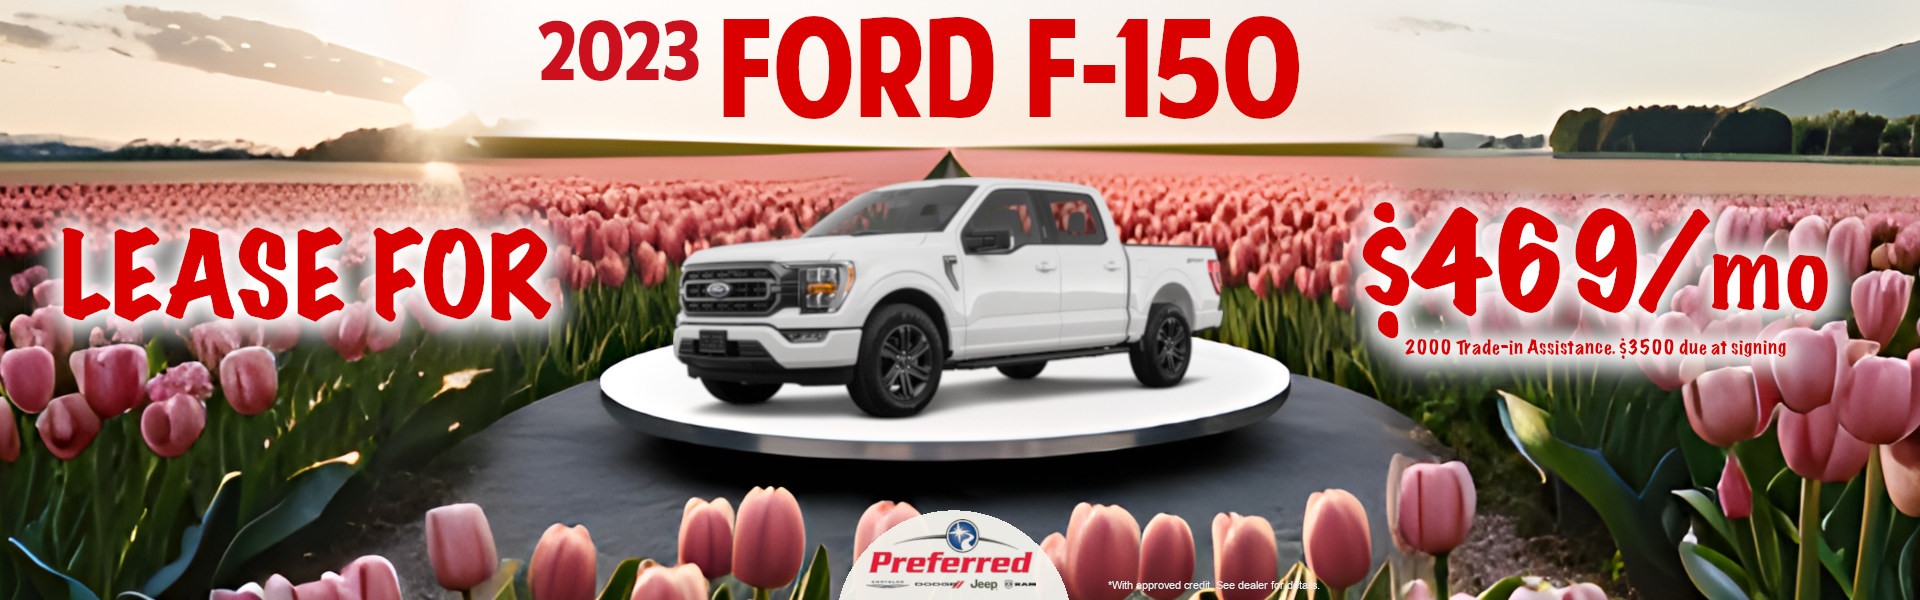 2023 F-150 lease for $469 a month